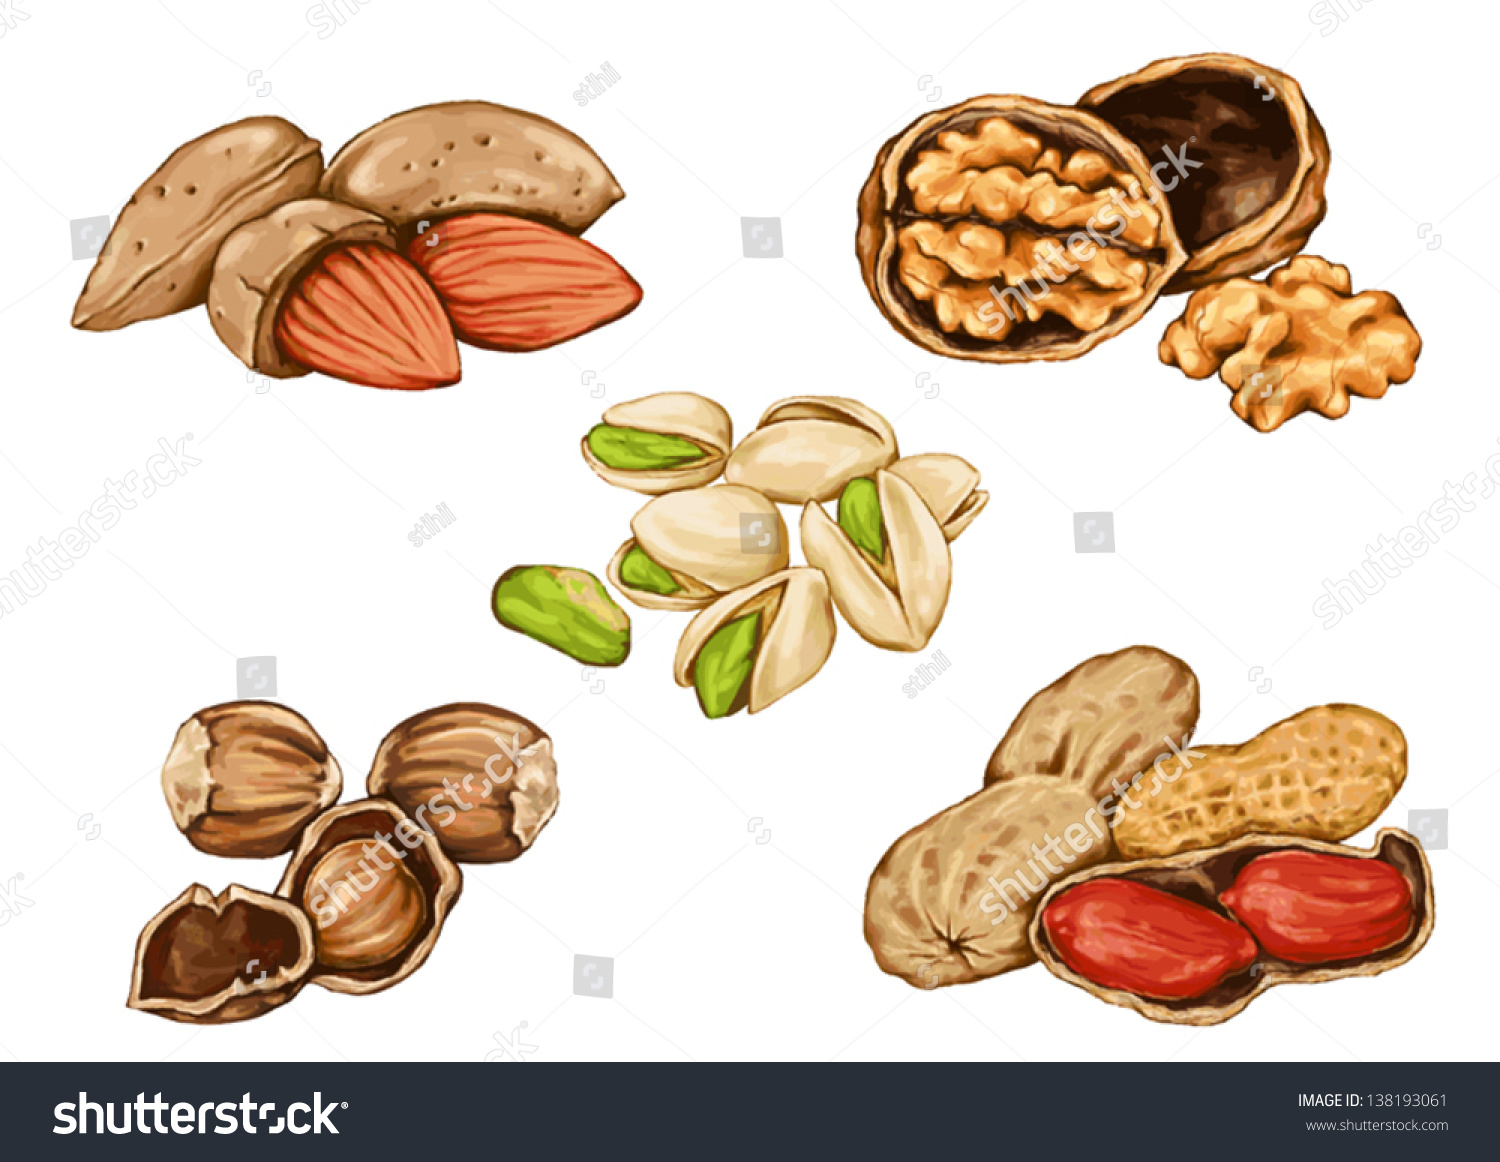 clipart of tree nuts - photo #33